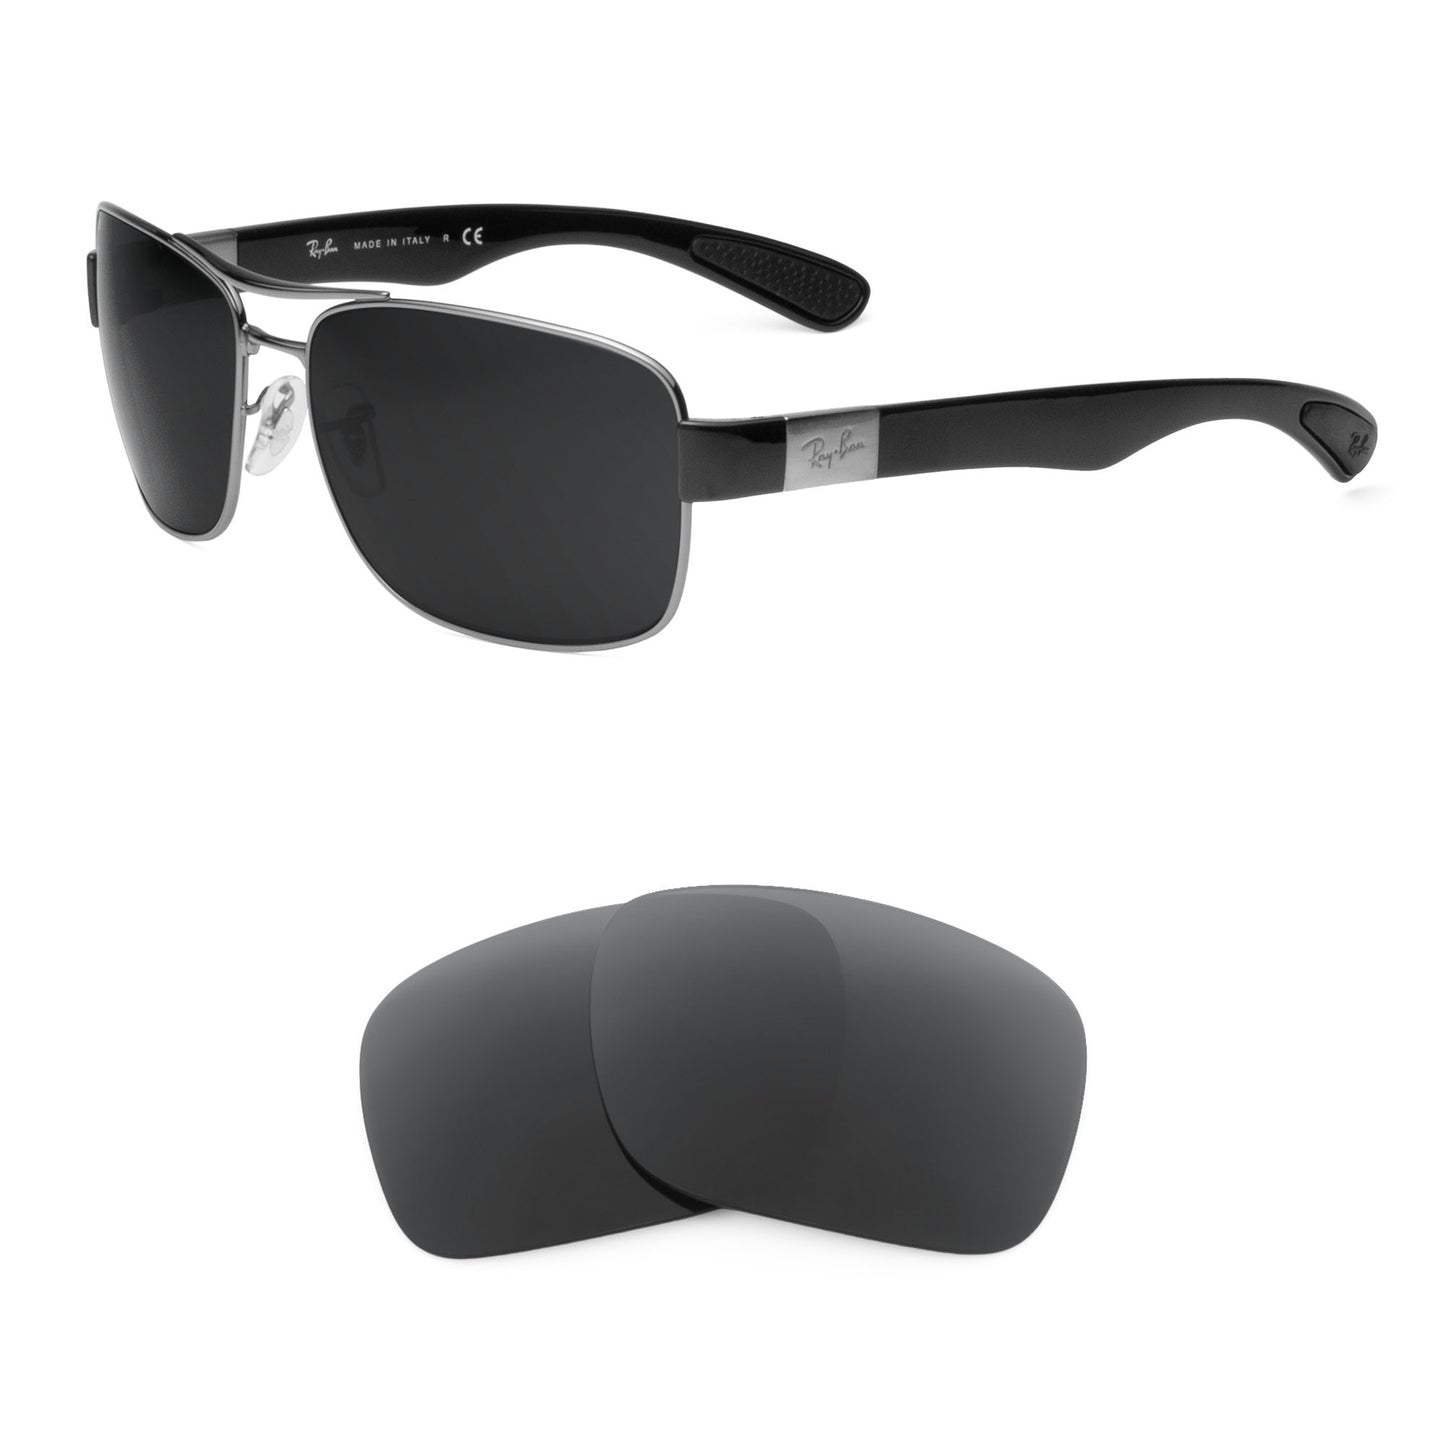 Ray-Ban RB3522 64mm sunglasses with replacement lenses